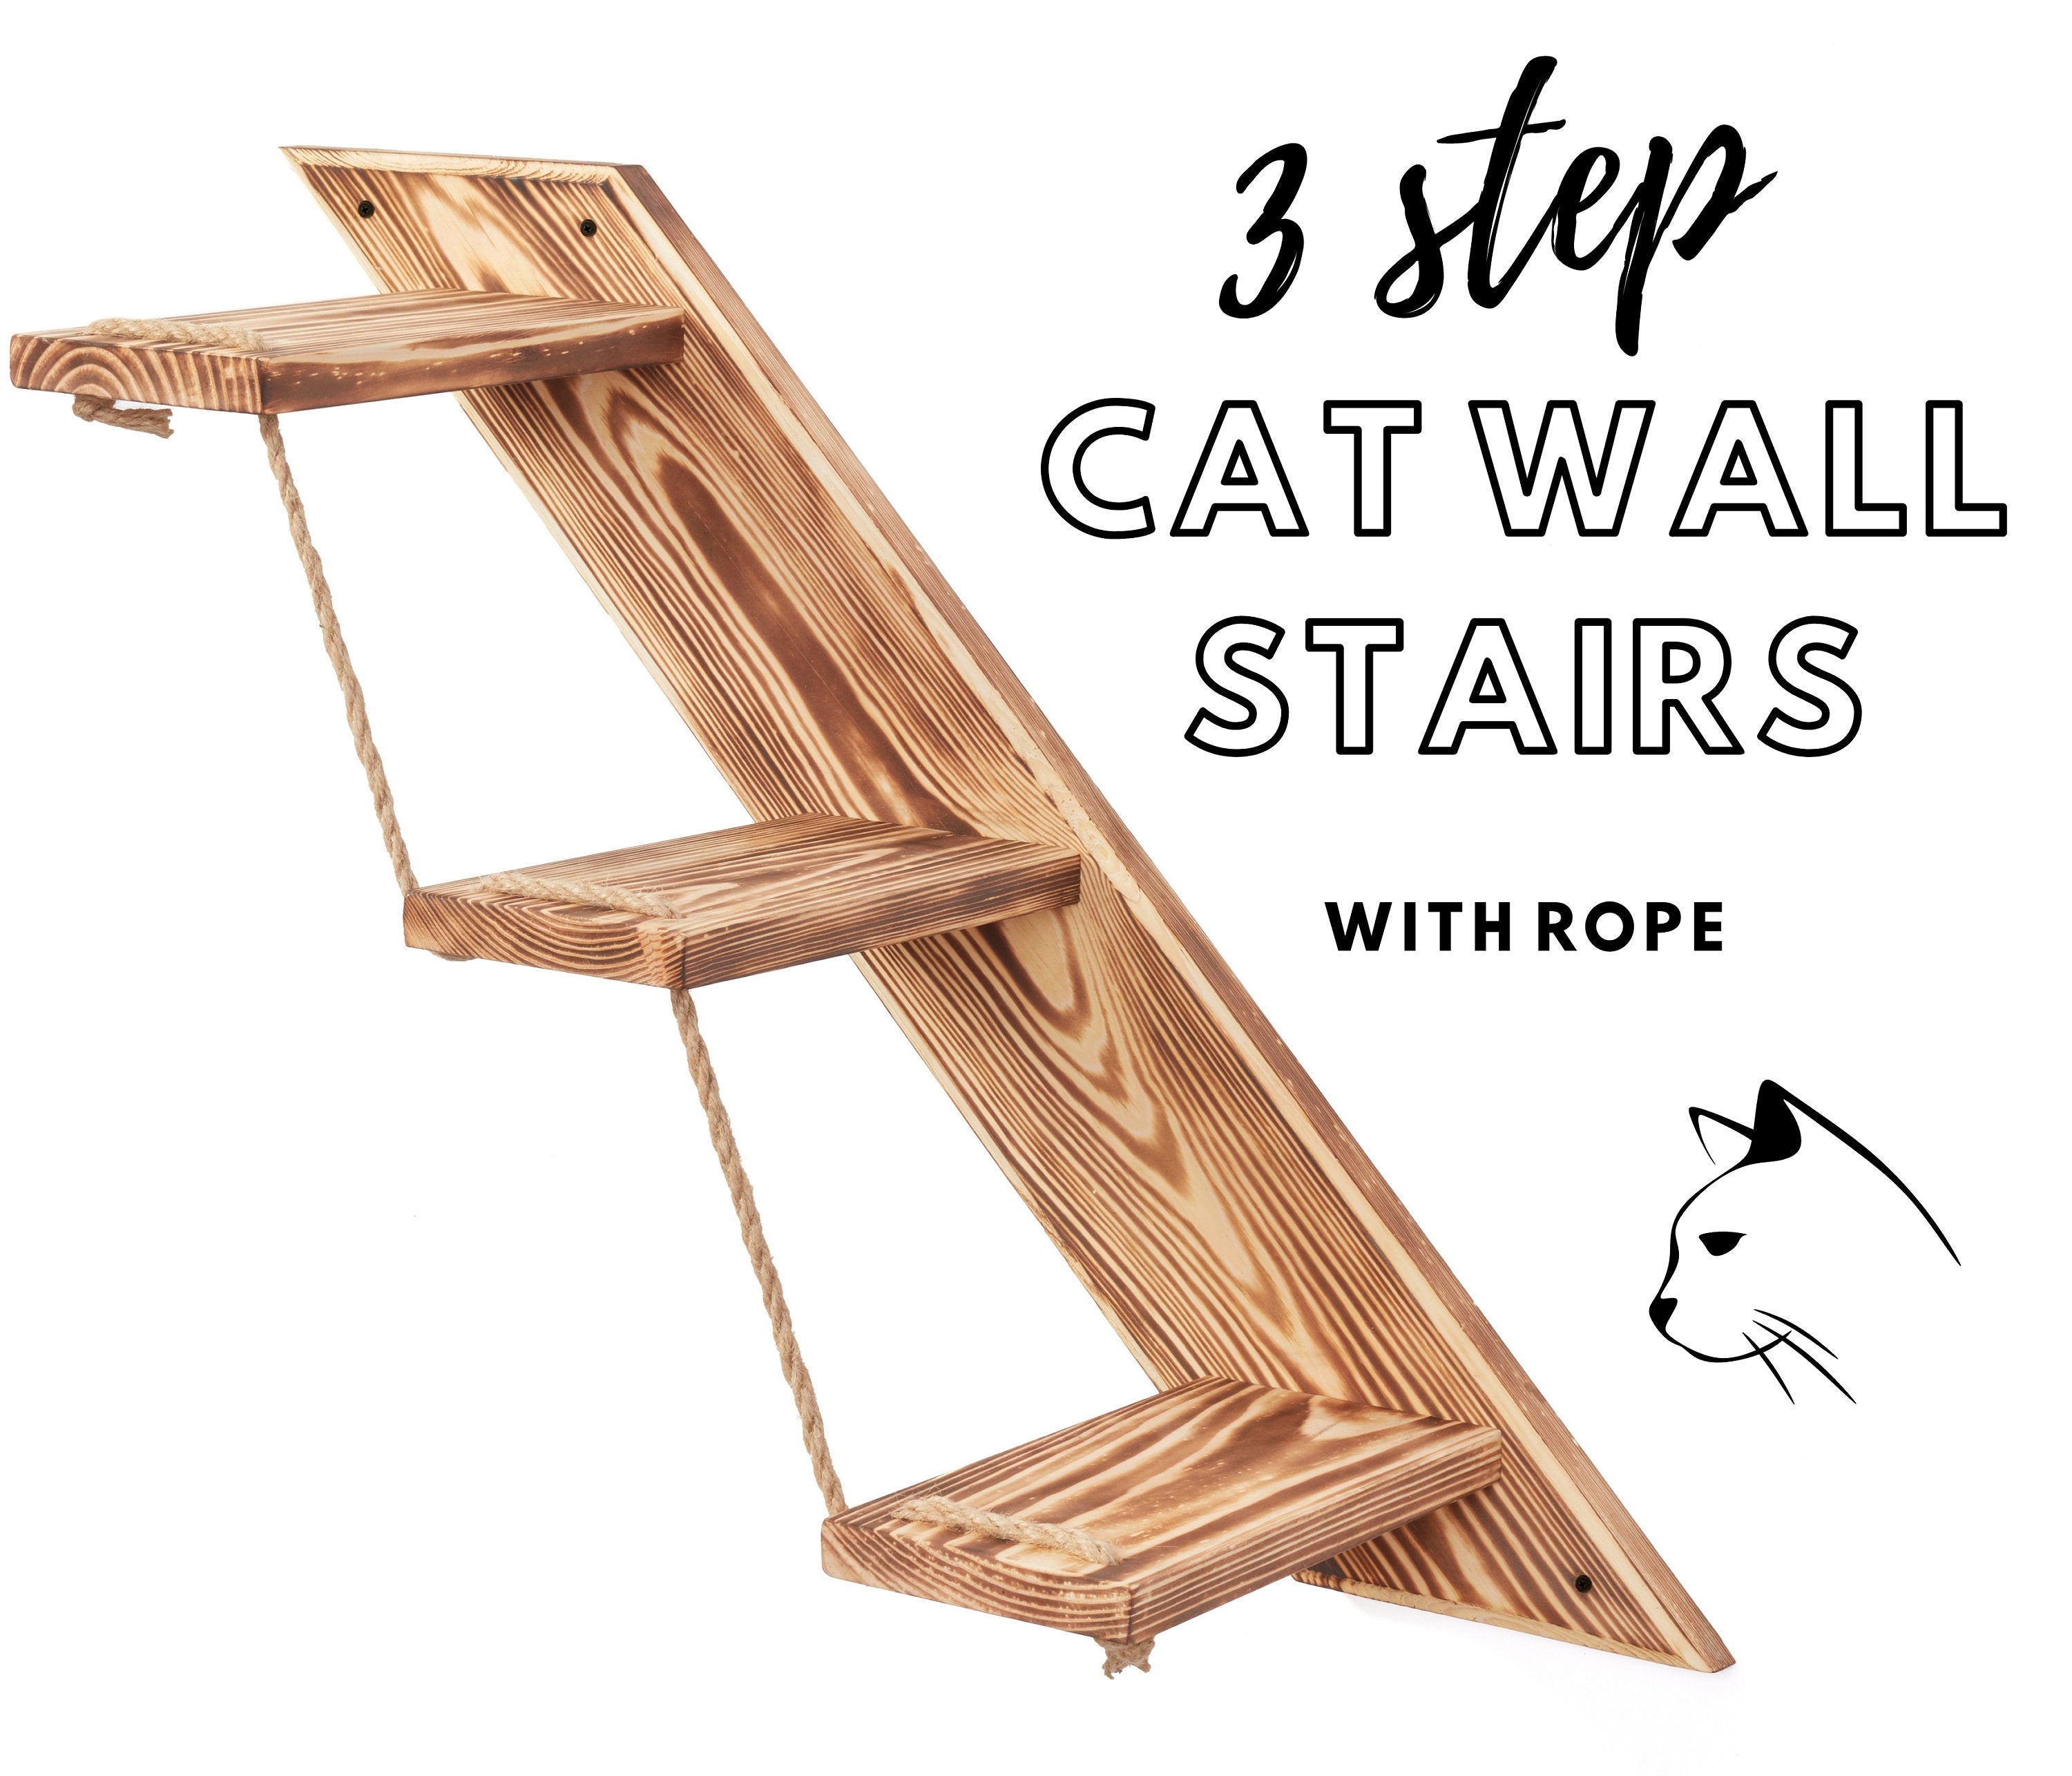 Cat Floating Wall Stairs With 3 Steps Stair Direction Lead Up Left | Wooden Cat Climbing Steps | Cat Wall Furniture